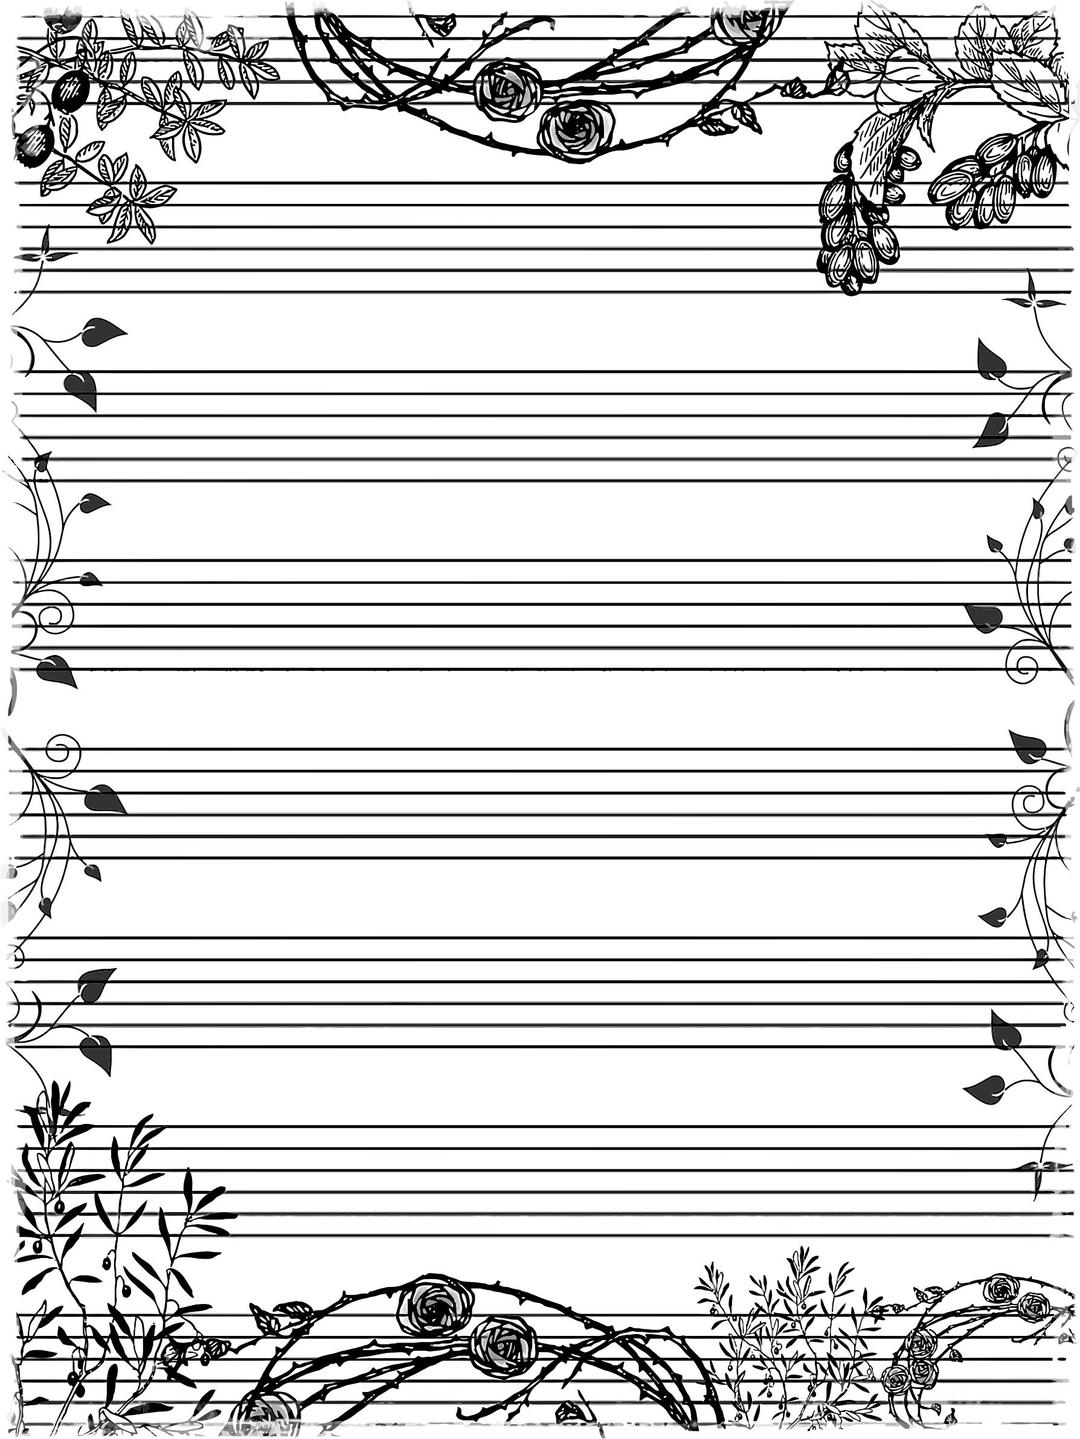 Decorative Writing Page png transparent